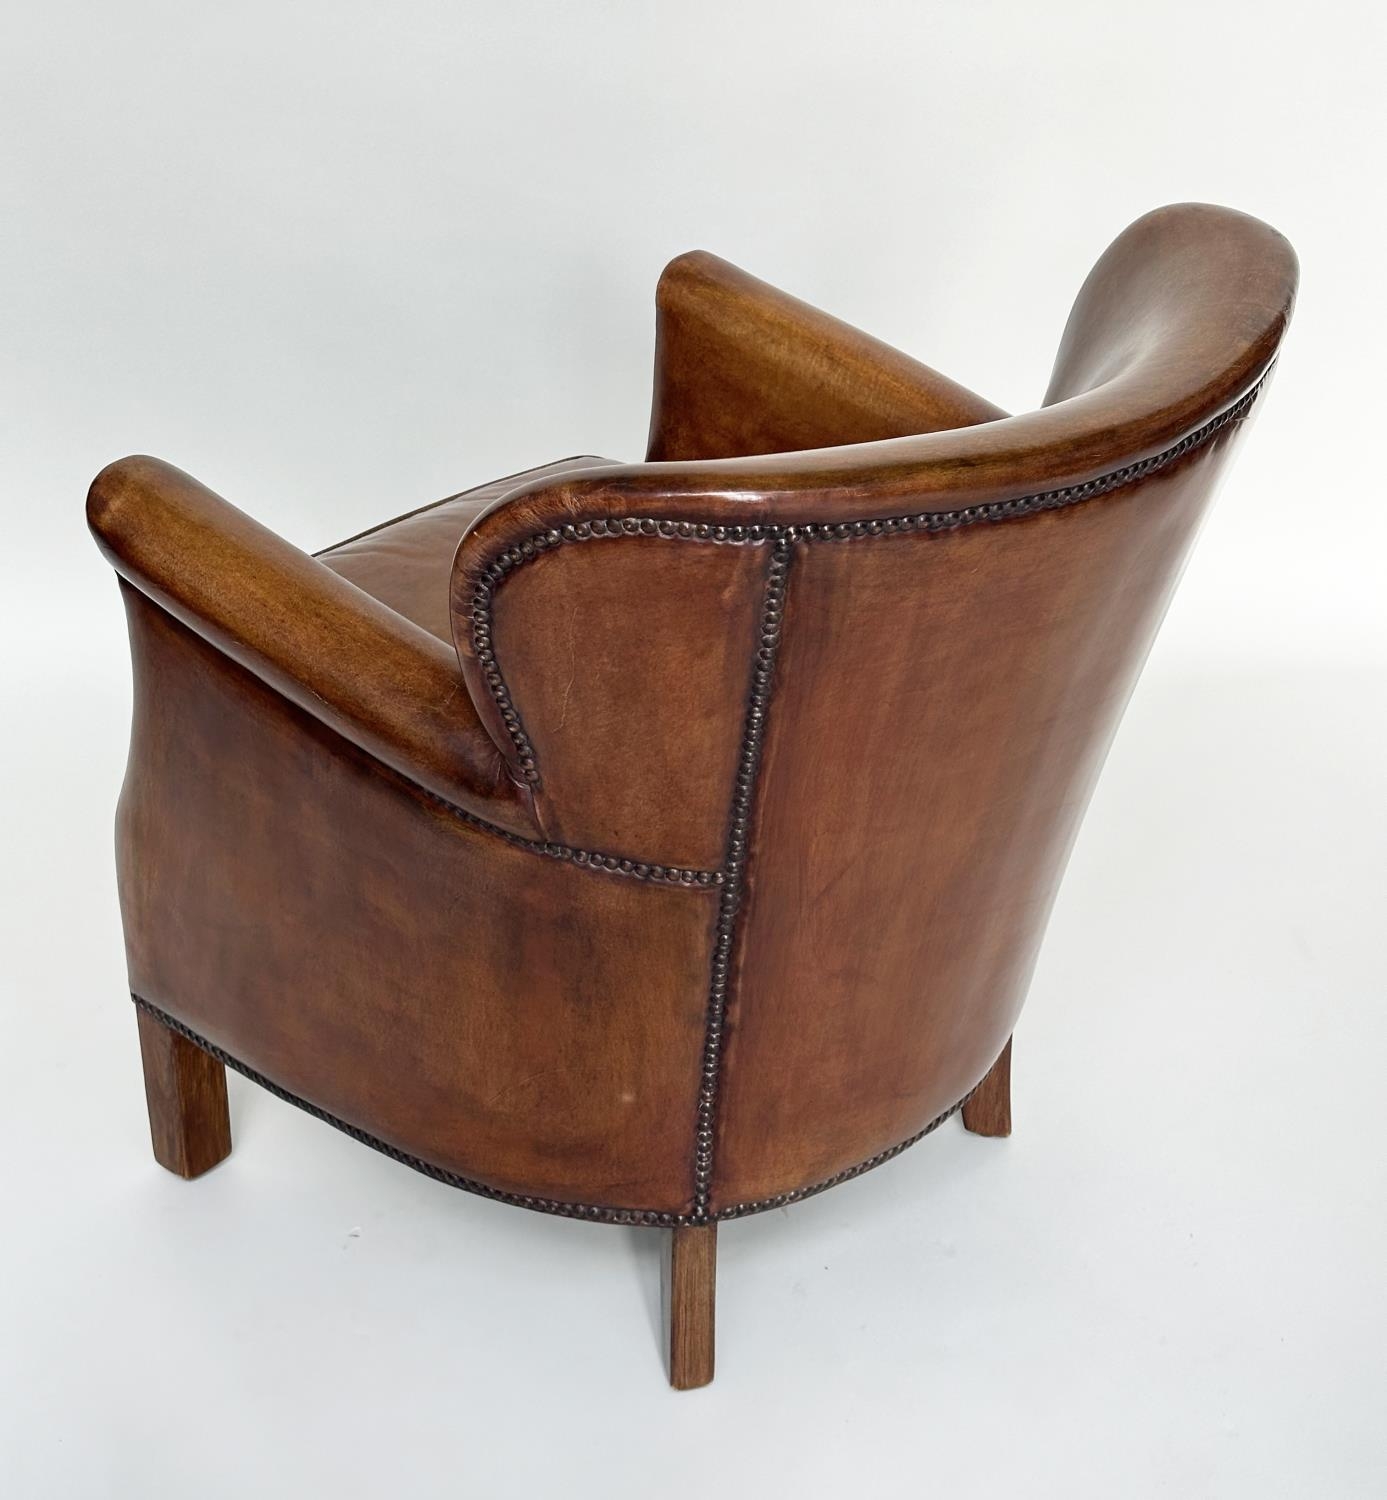 LITTLE PROFESSOR ARMCHAIR, in the manner of Timothy Oulton soft natural mid brown leather upholstery - Image 6 of 9